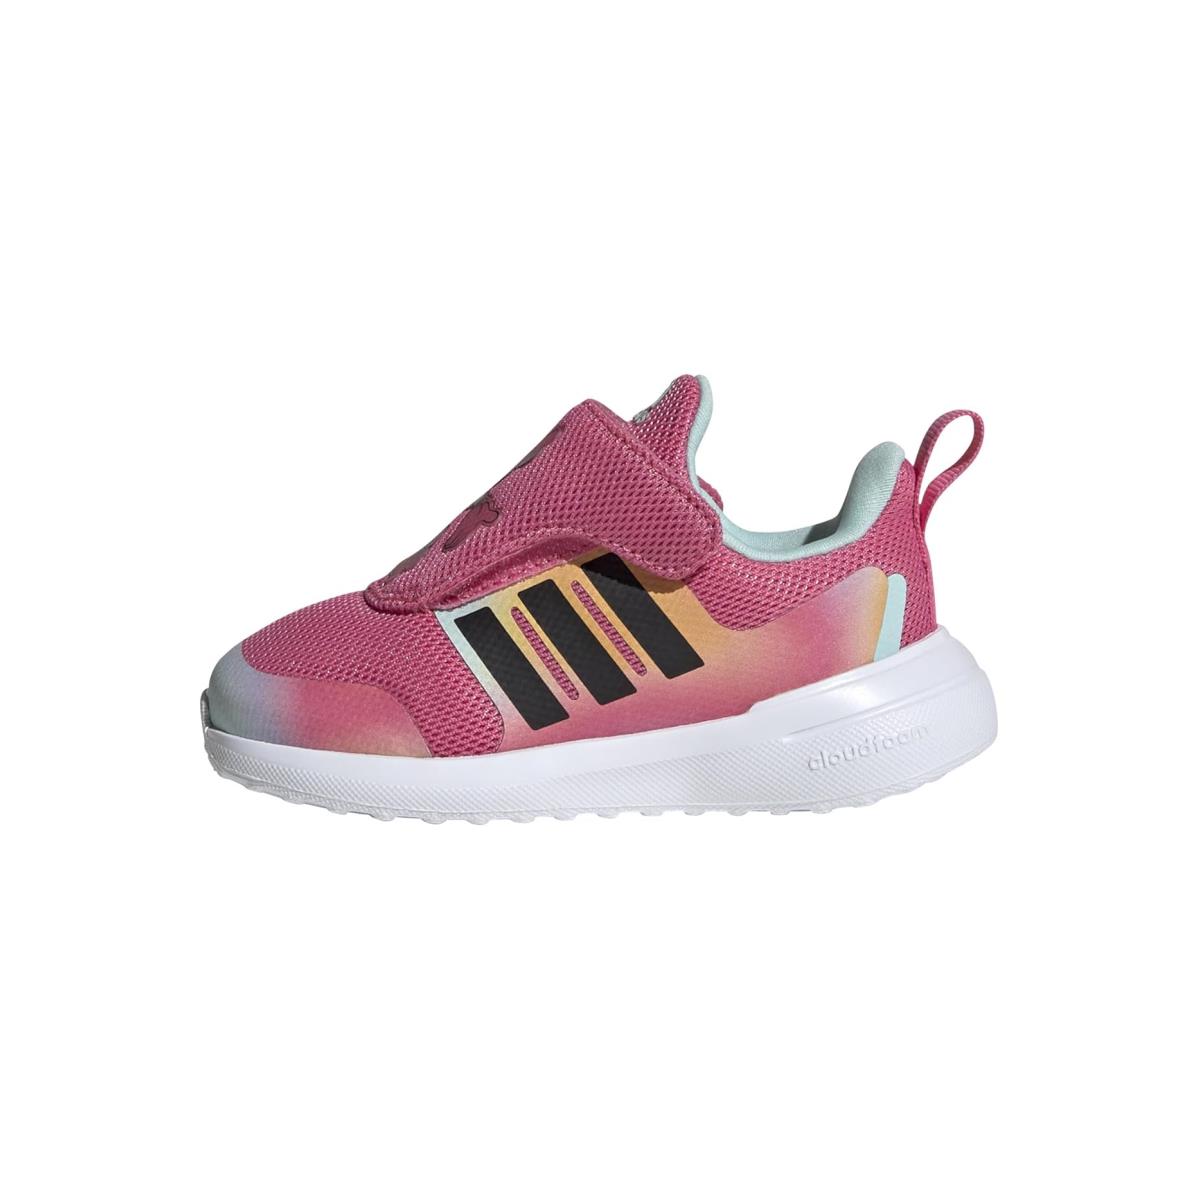 Girl`s Shoes Adidas Kids Fortarun x Minnie Mouse Toddler Pink Fusion/Black/Spark